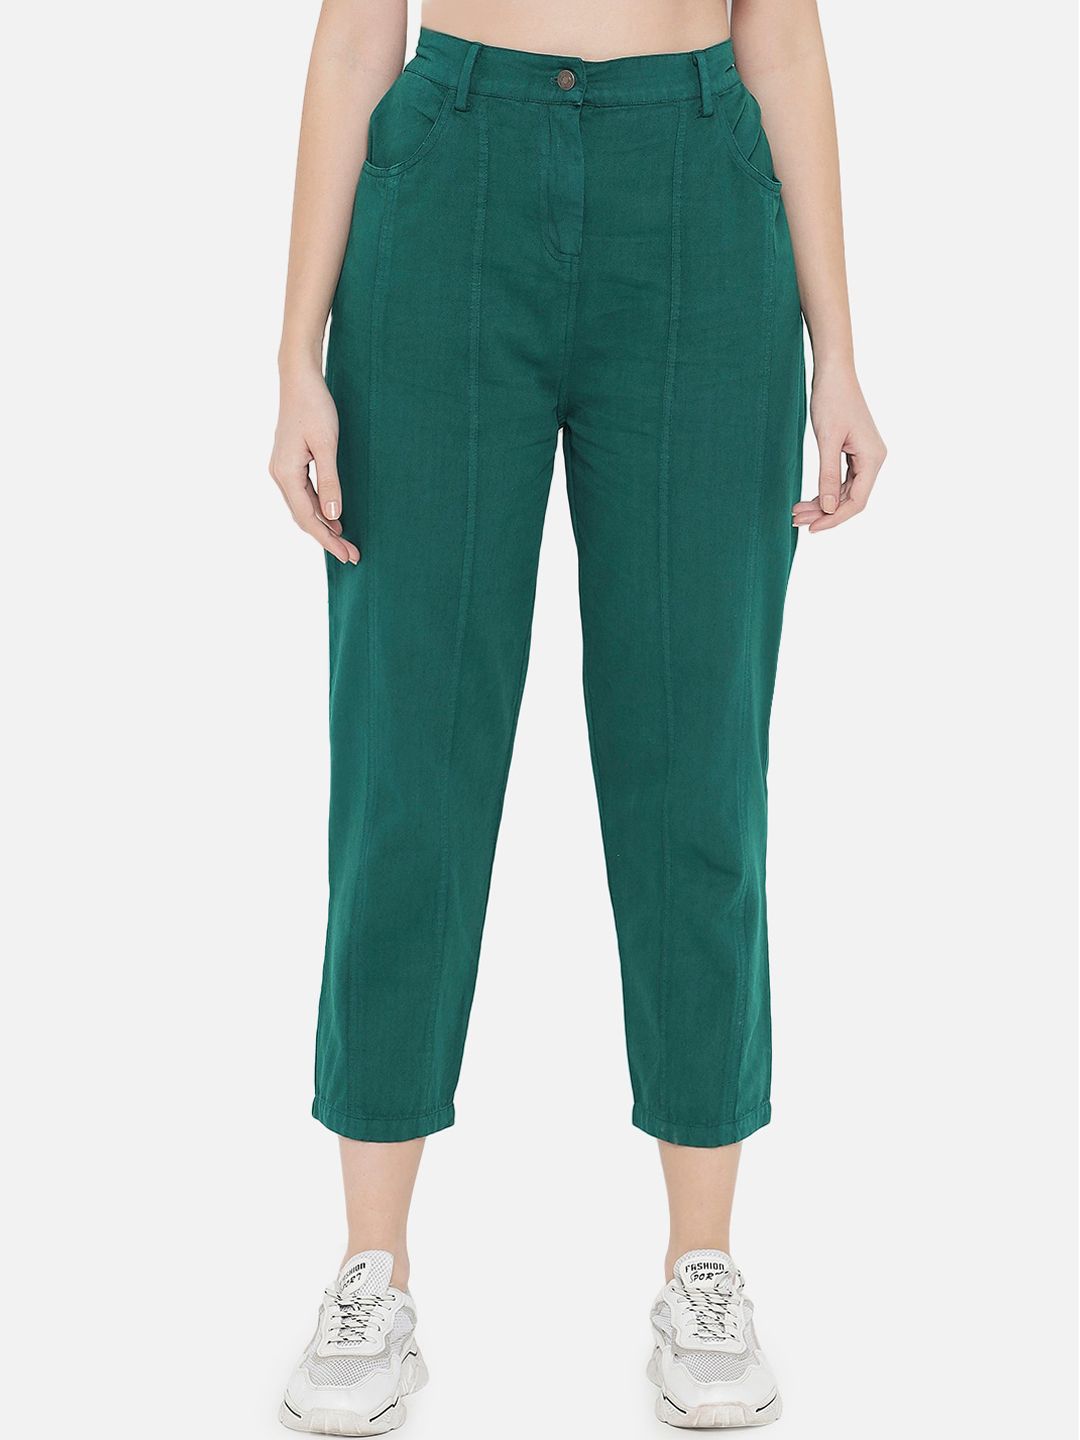 Orchid Blues Women Green High-Rise Jeans Price in India